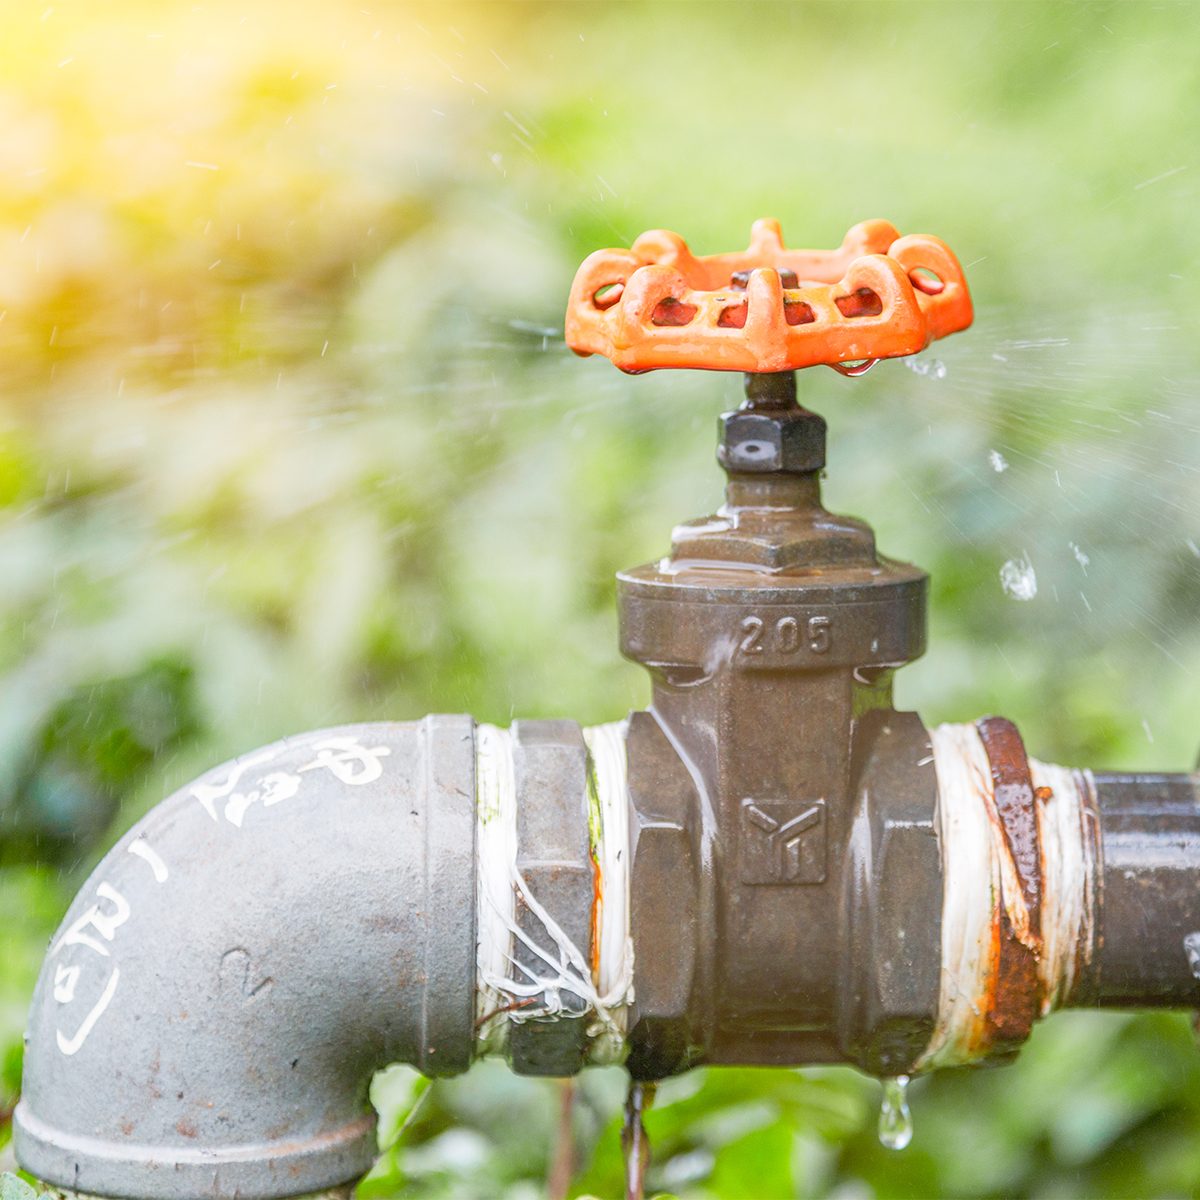 How To Fix a Leaky Street Valve on Your Water Line